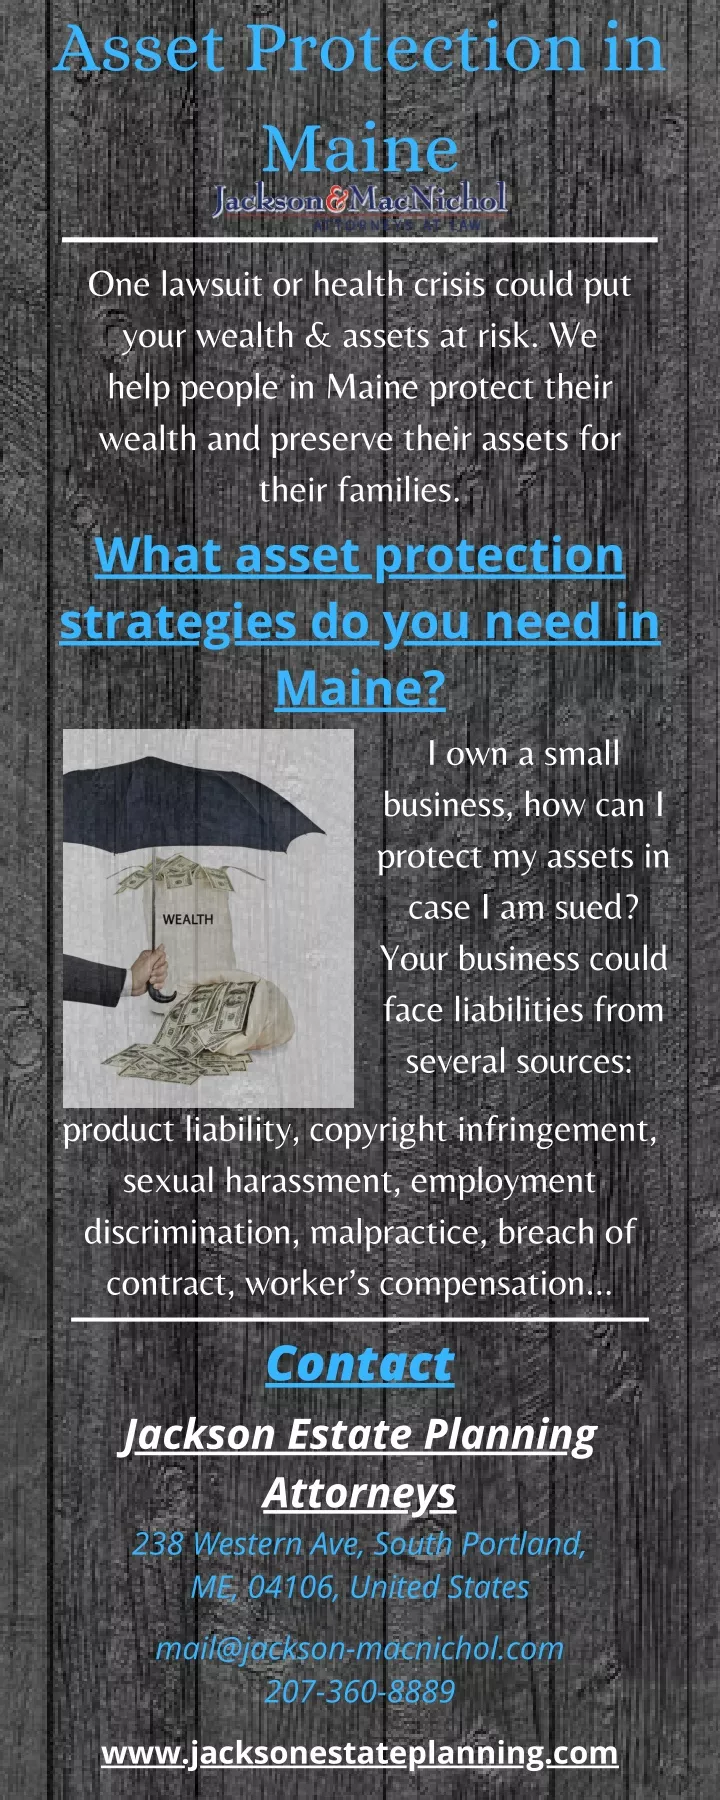 asset protection in maine